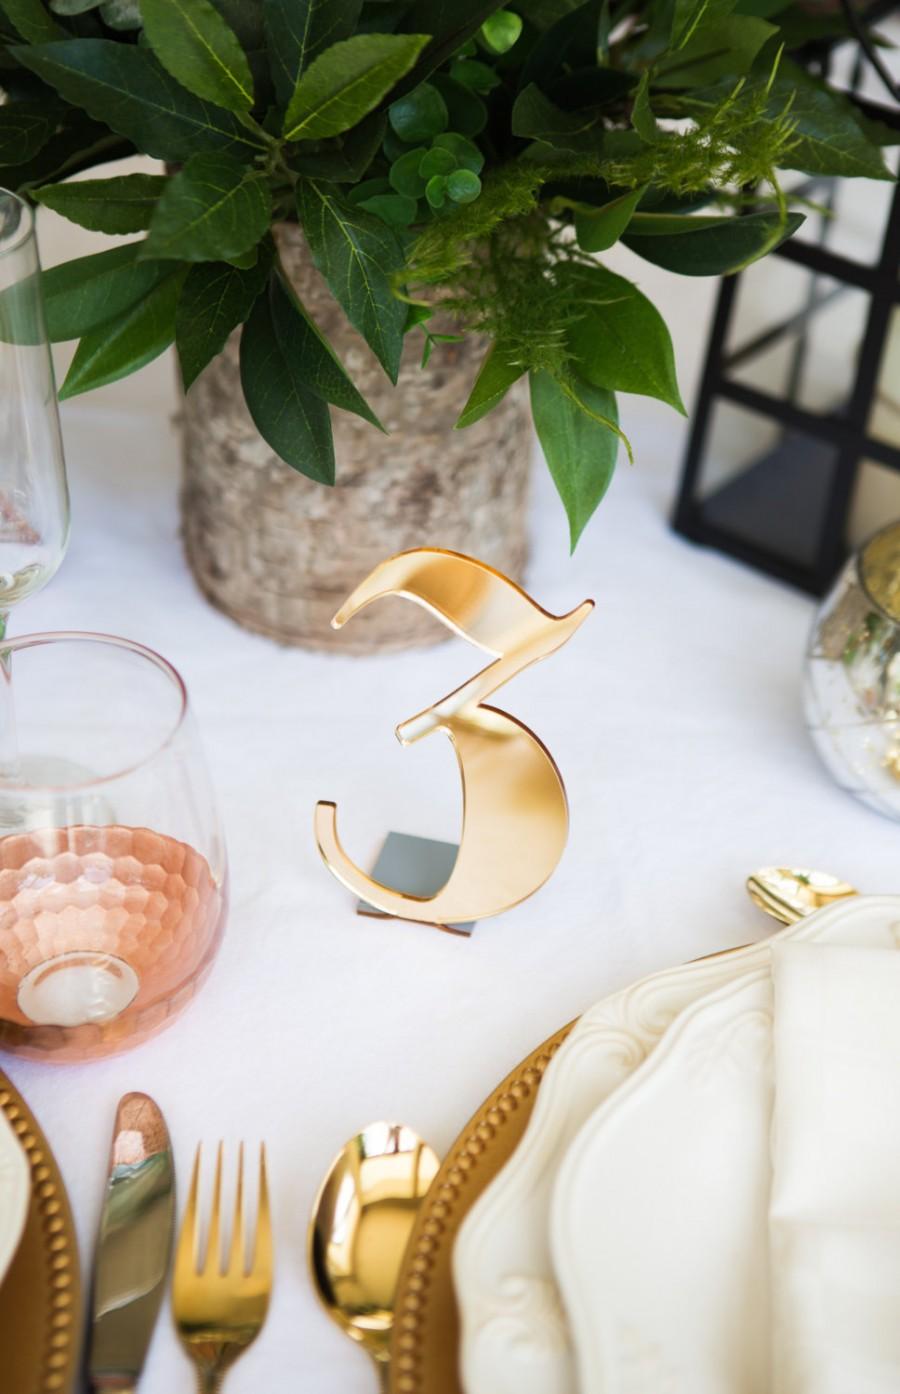 Свадьба - Acrylic Table Numbers for Weddings and Events - Standing Numbers Gold, Silver, Clear Acrylic Chic Wedding Decor Centerpieces (Item - ACB100)